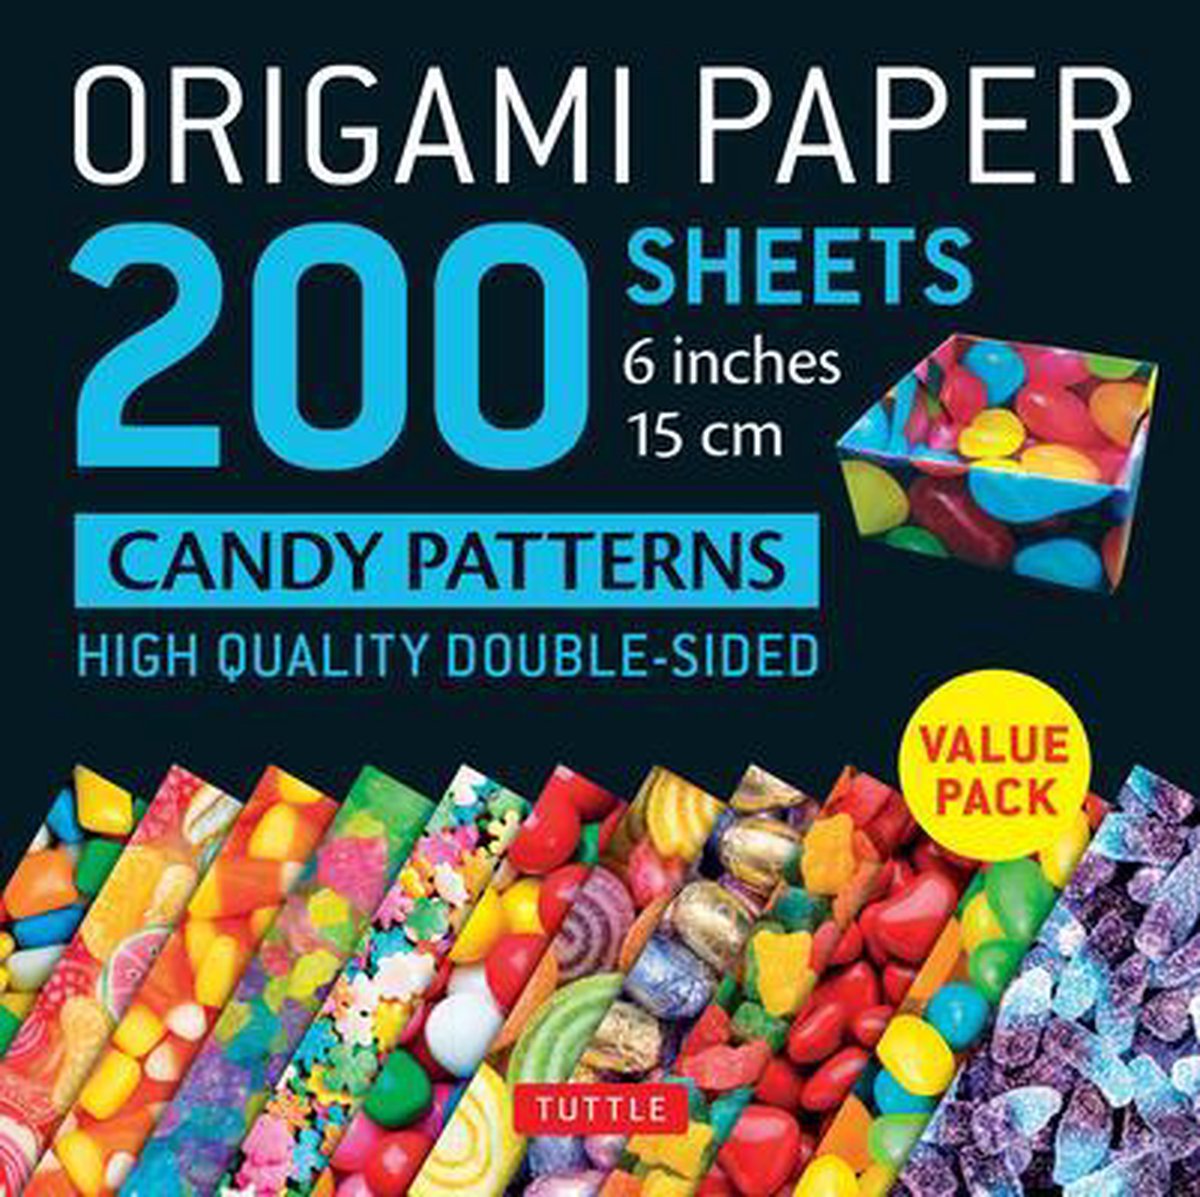 Origami Paper 200 Sheets Candy Patterns 6 Inch